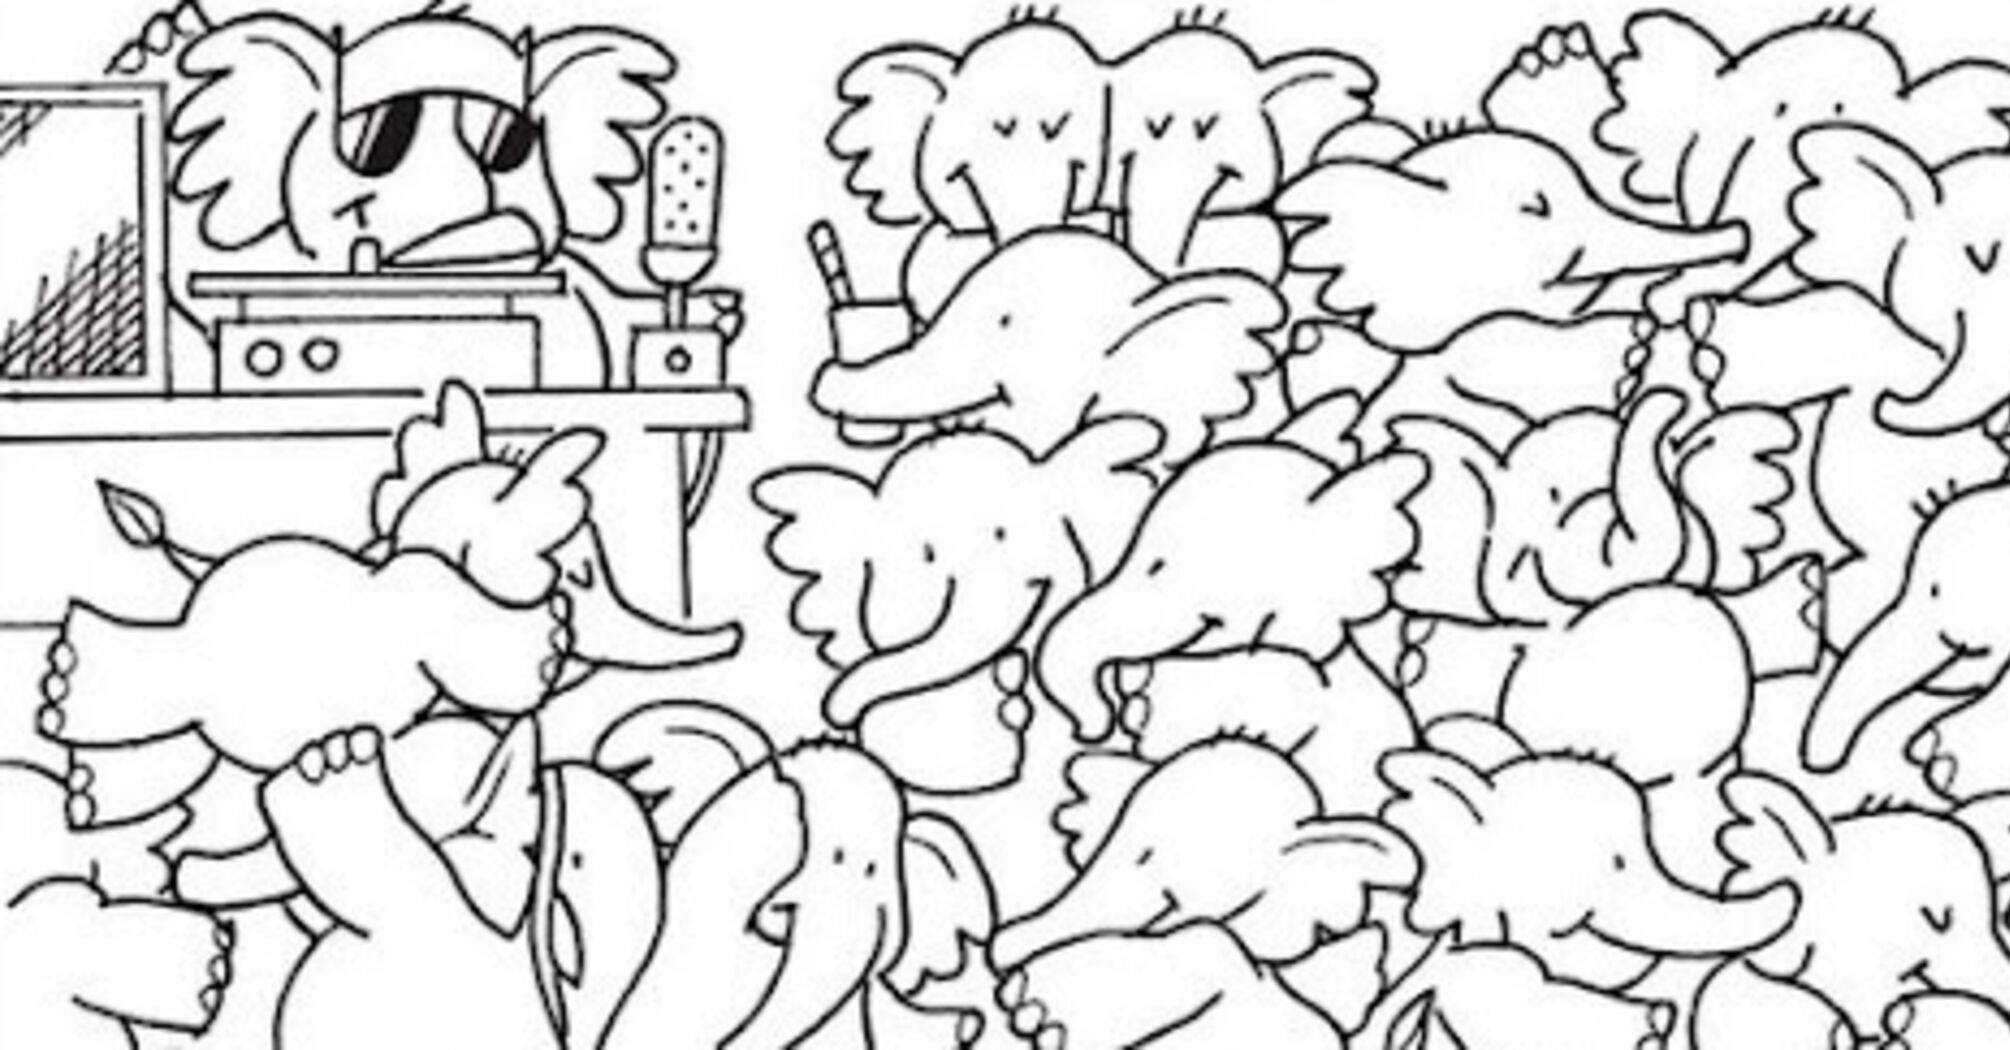 Find the whale among the elephants: an optical puzzle for the most attentive